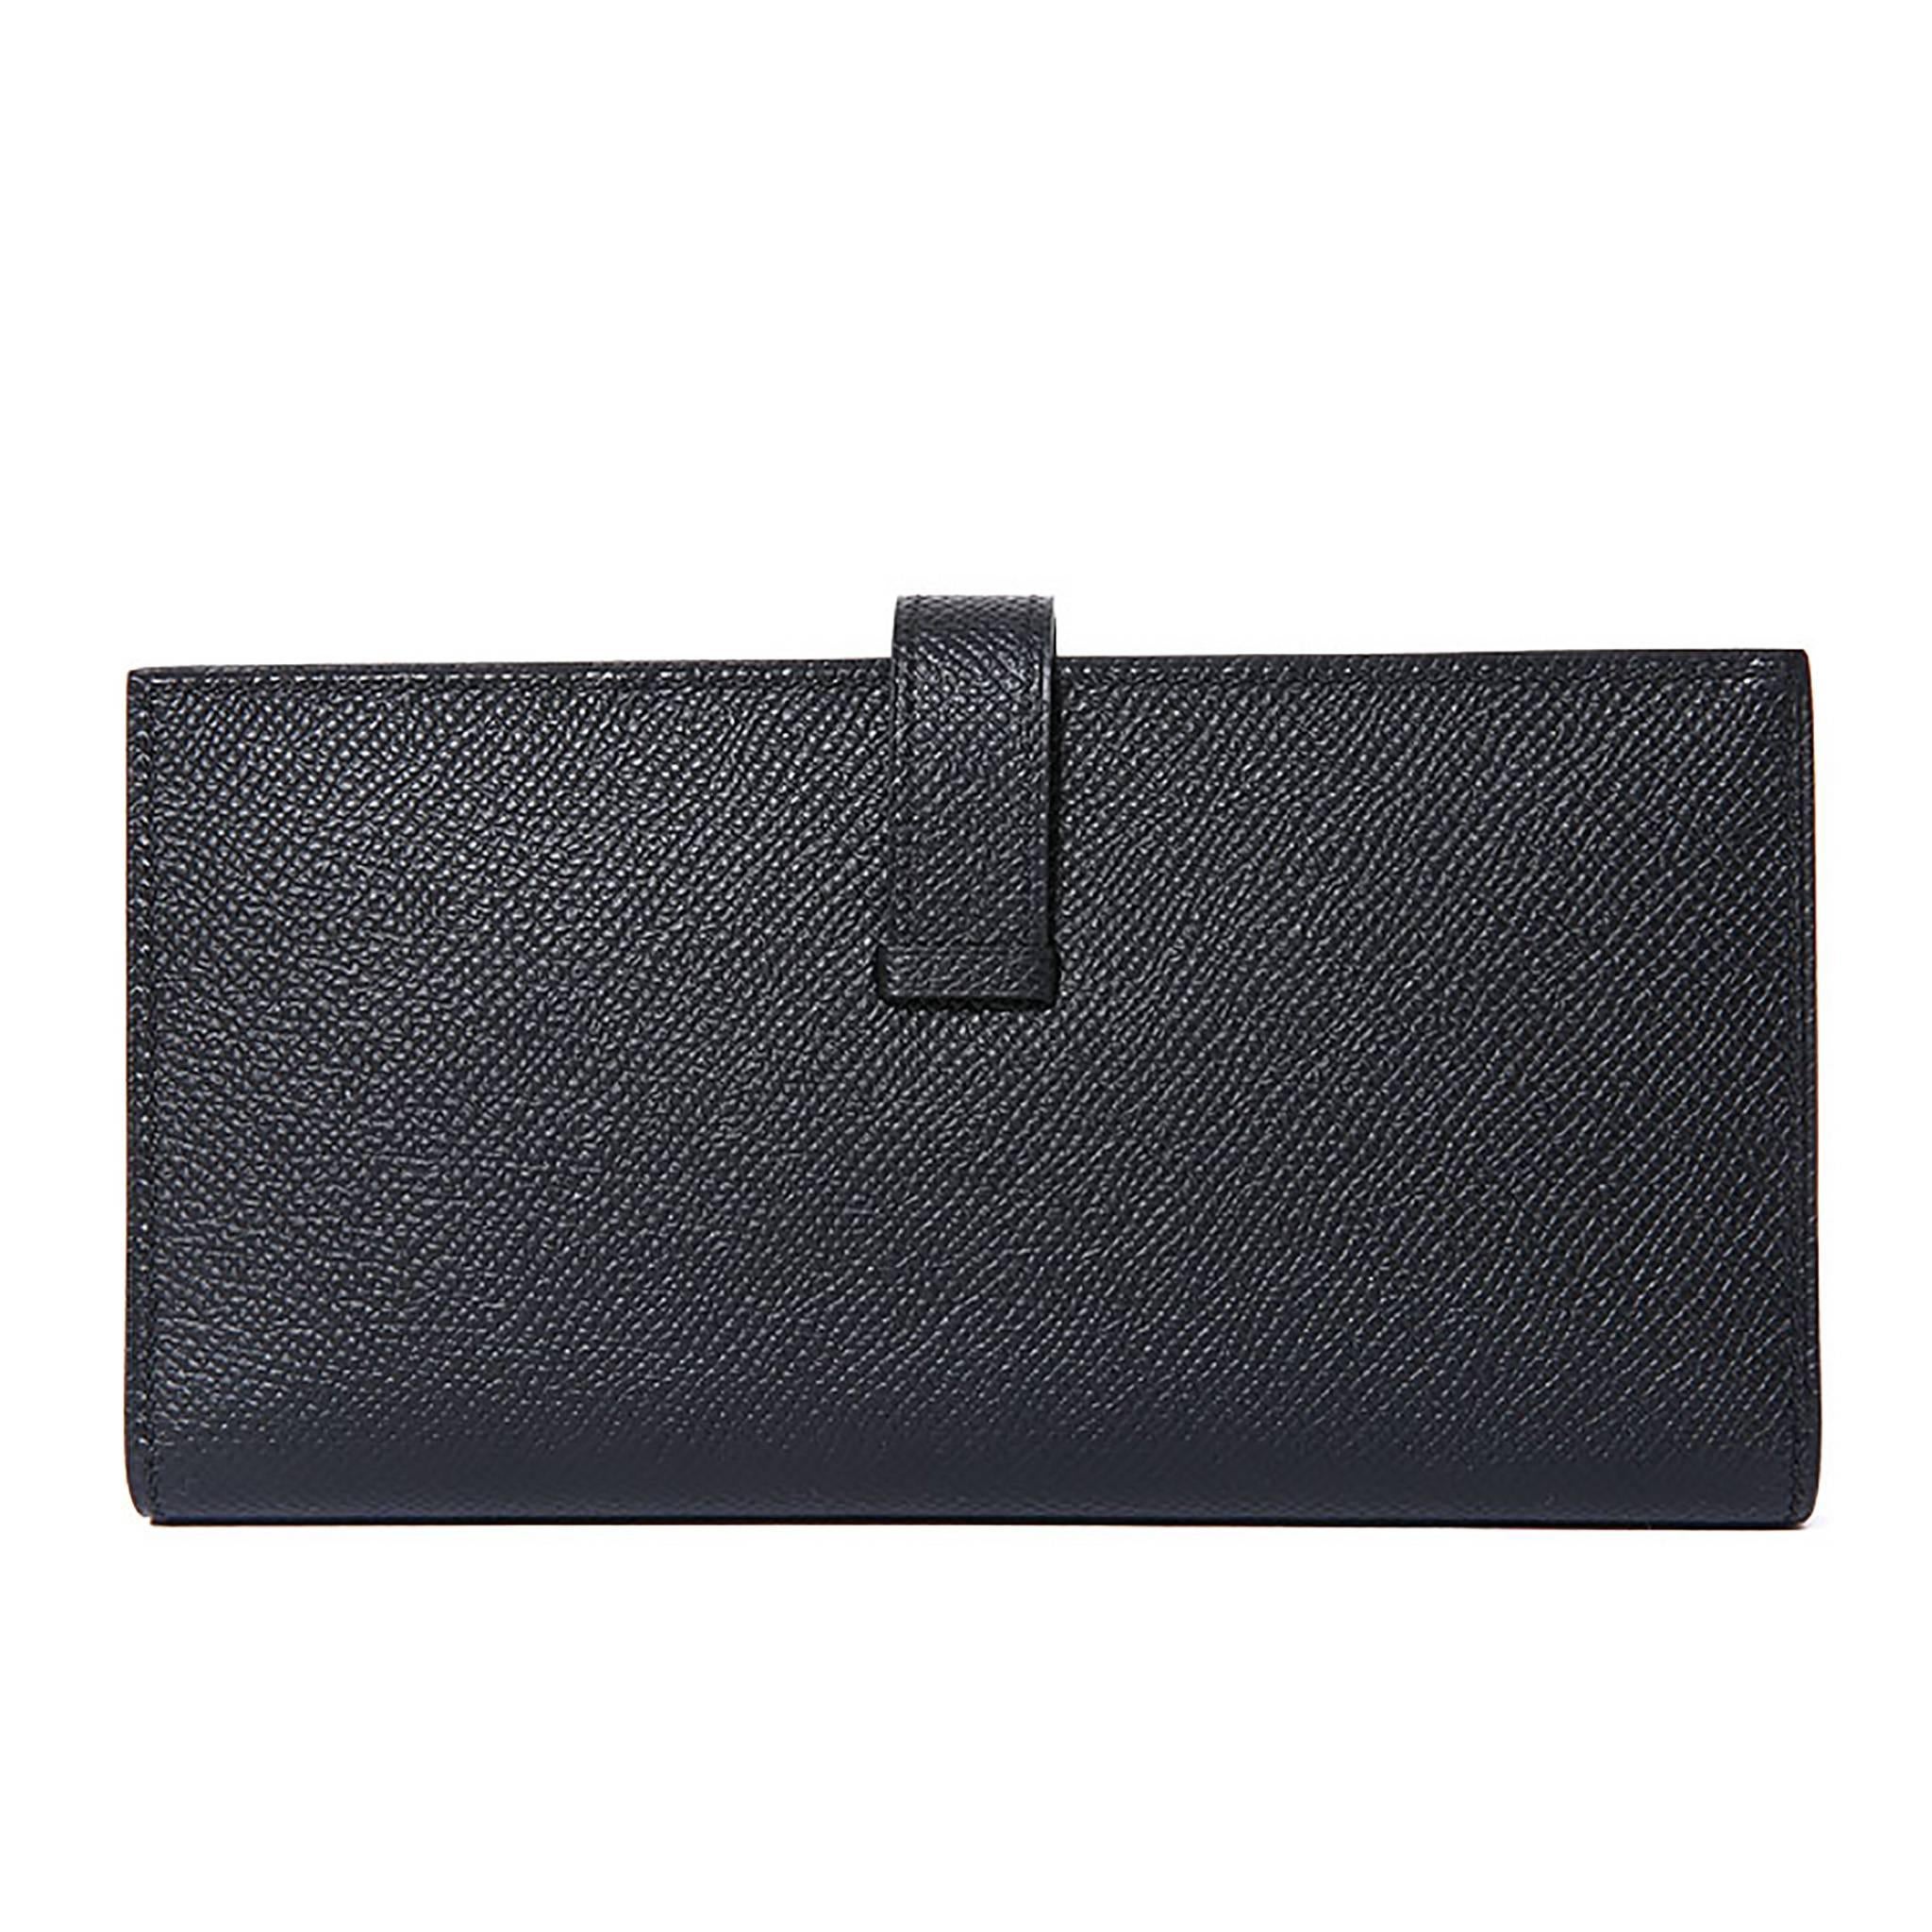 Hermes "Bearn" Wallet Epsom Leather 89 Black Color PHW

Pristine condition. Pre-owned and never used

Model: Bearn

Composition: Epsom

Color: 89 Black

Hardware: Palladium

Stamp: A

Measures: 6.88 H inch X 3.74 inch D / 17.5 cm H x 9.5